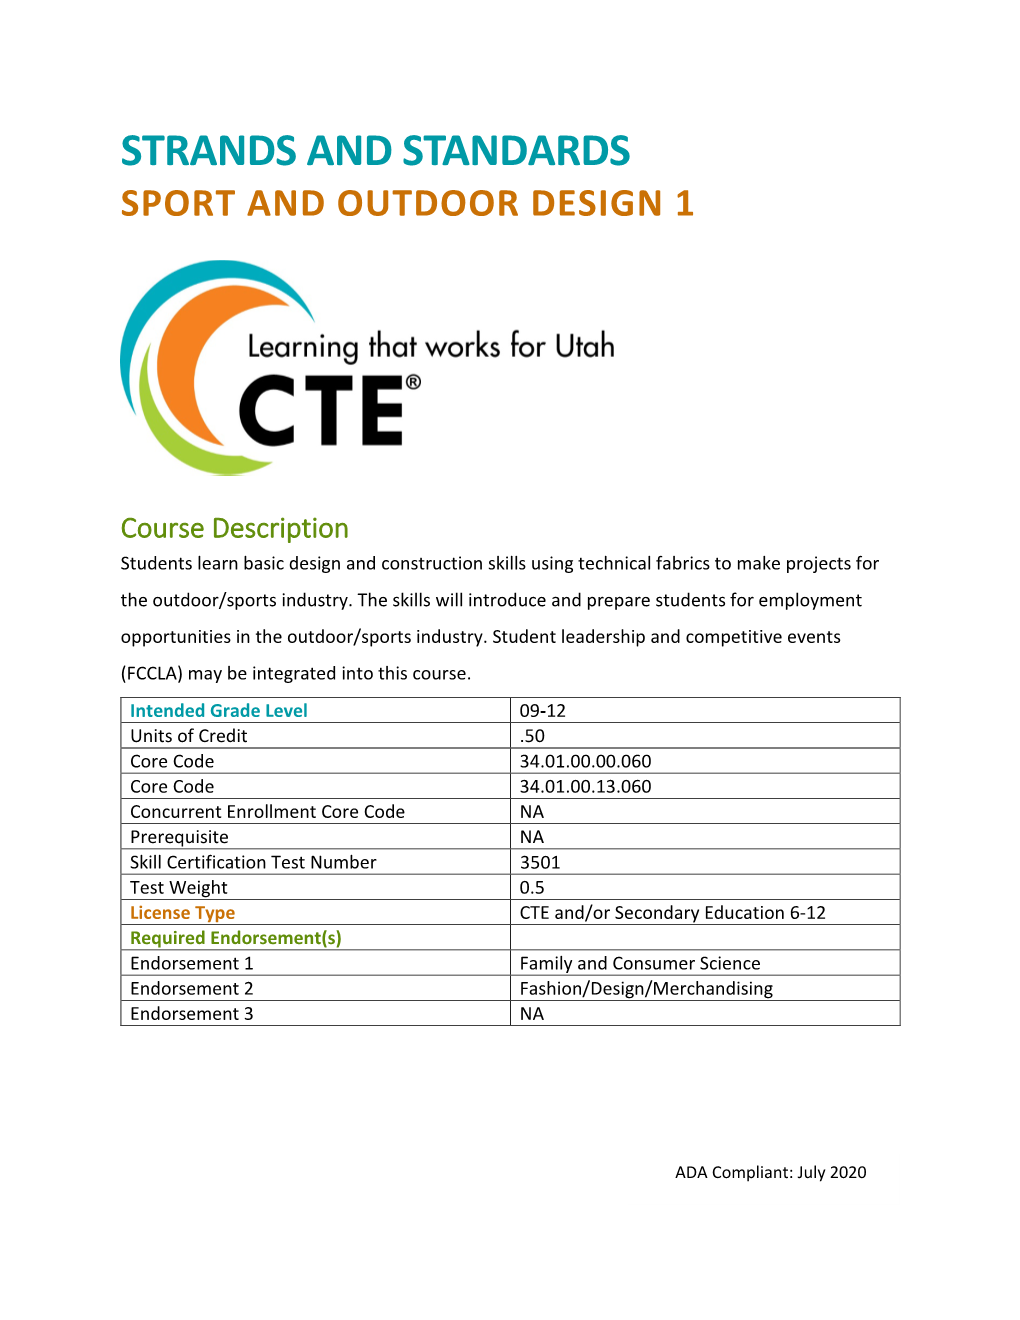 Sport and Outdoor Design 1 Strands and Standards